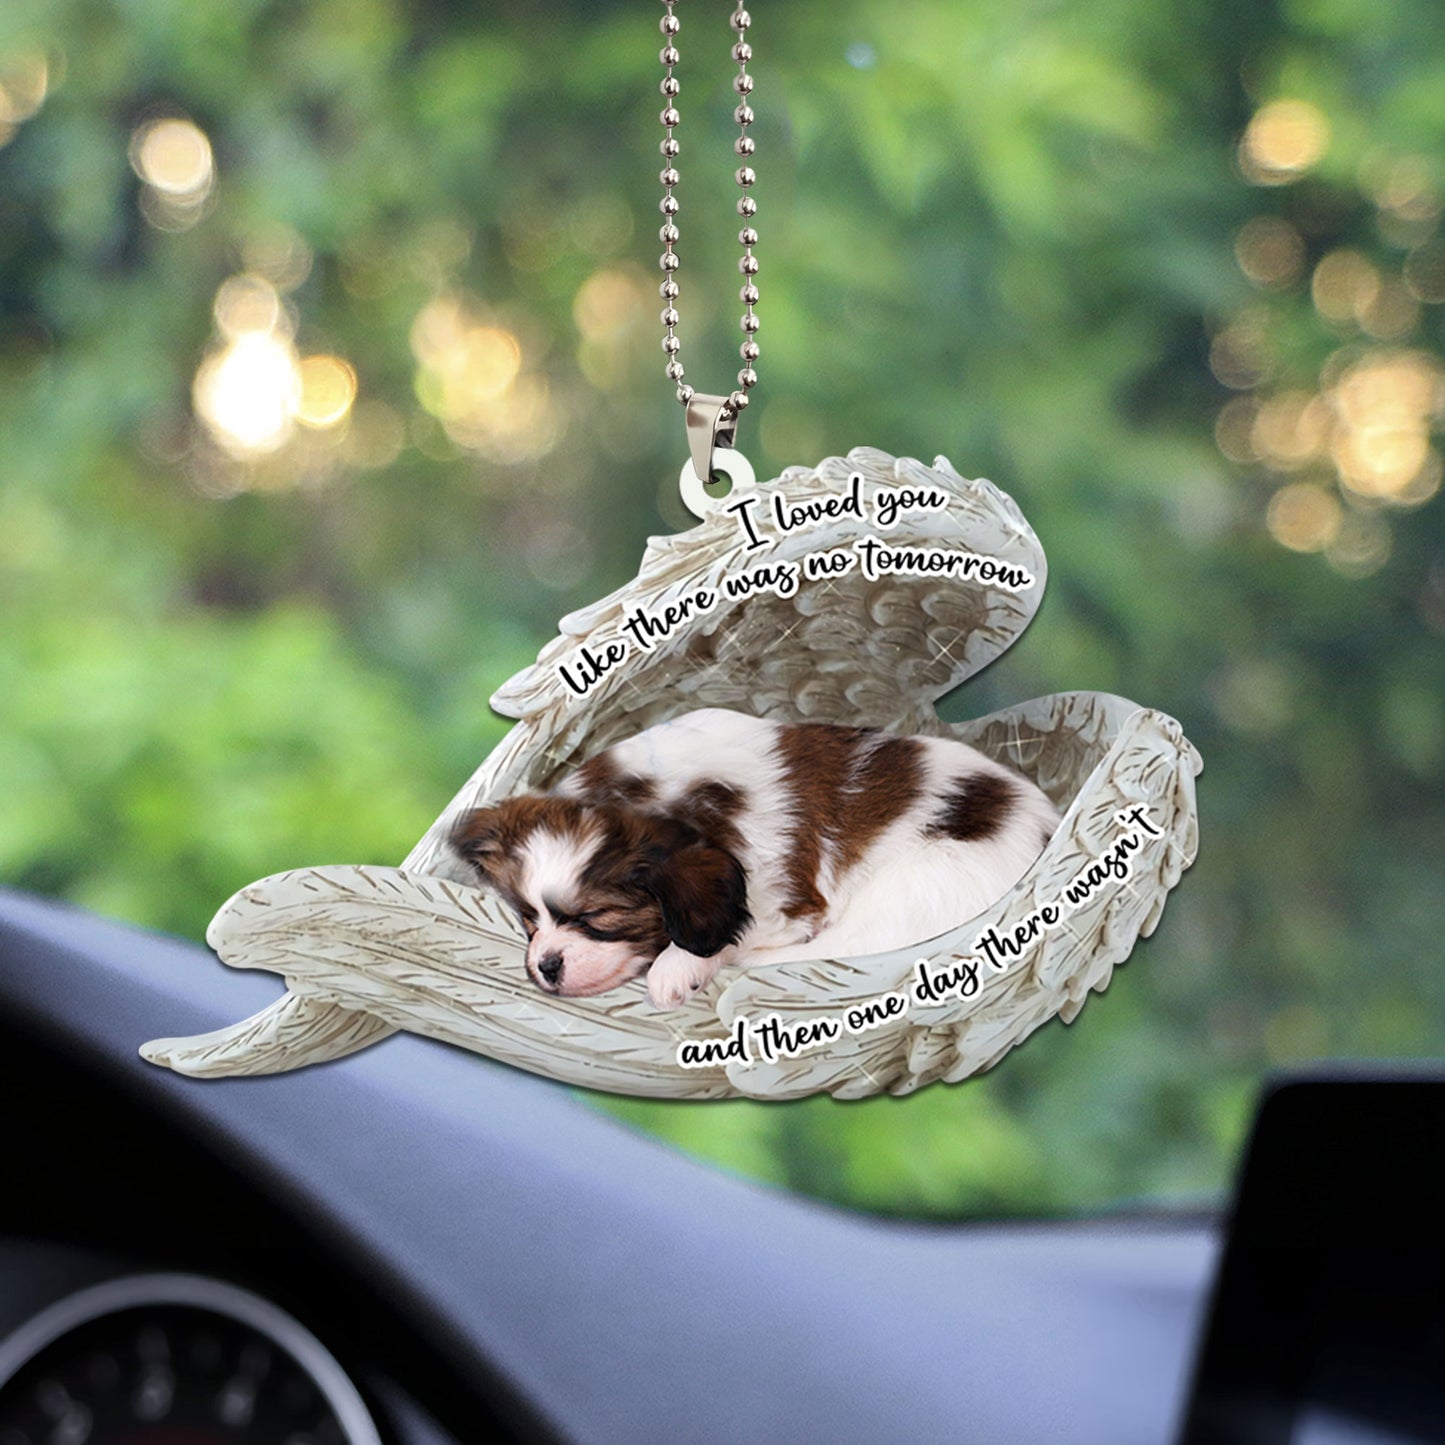 Papillon Sleeping Angel Dog Personalizedwitch Flat Car Memorial Ornament